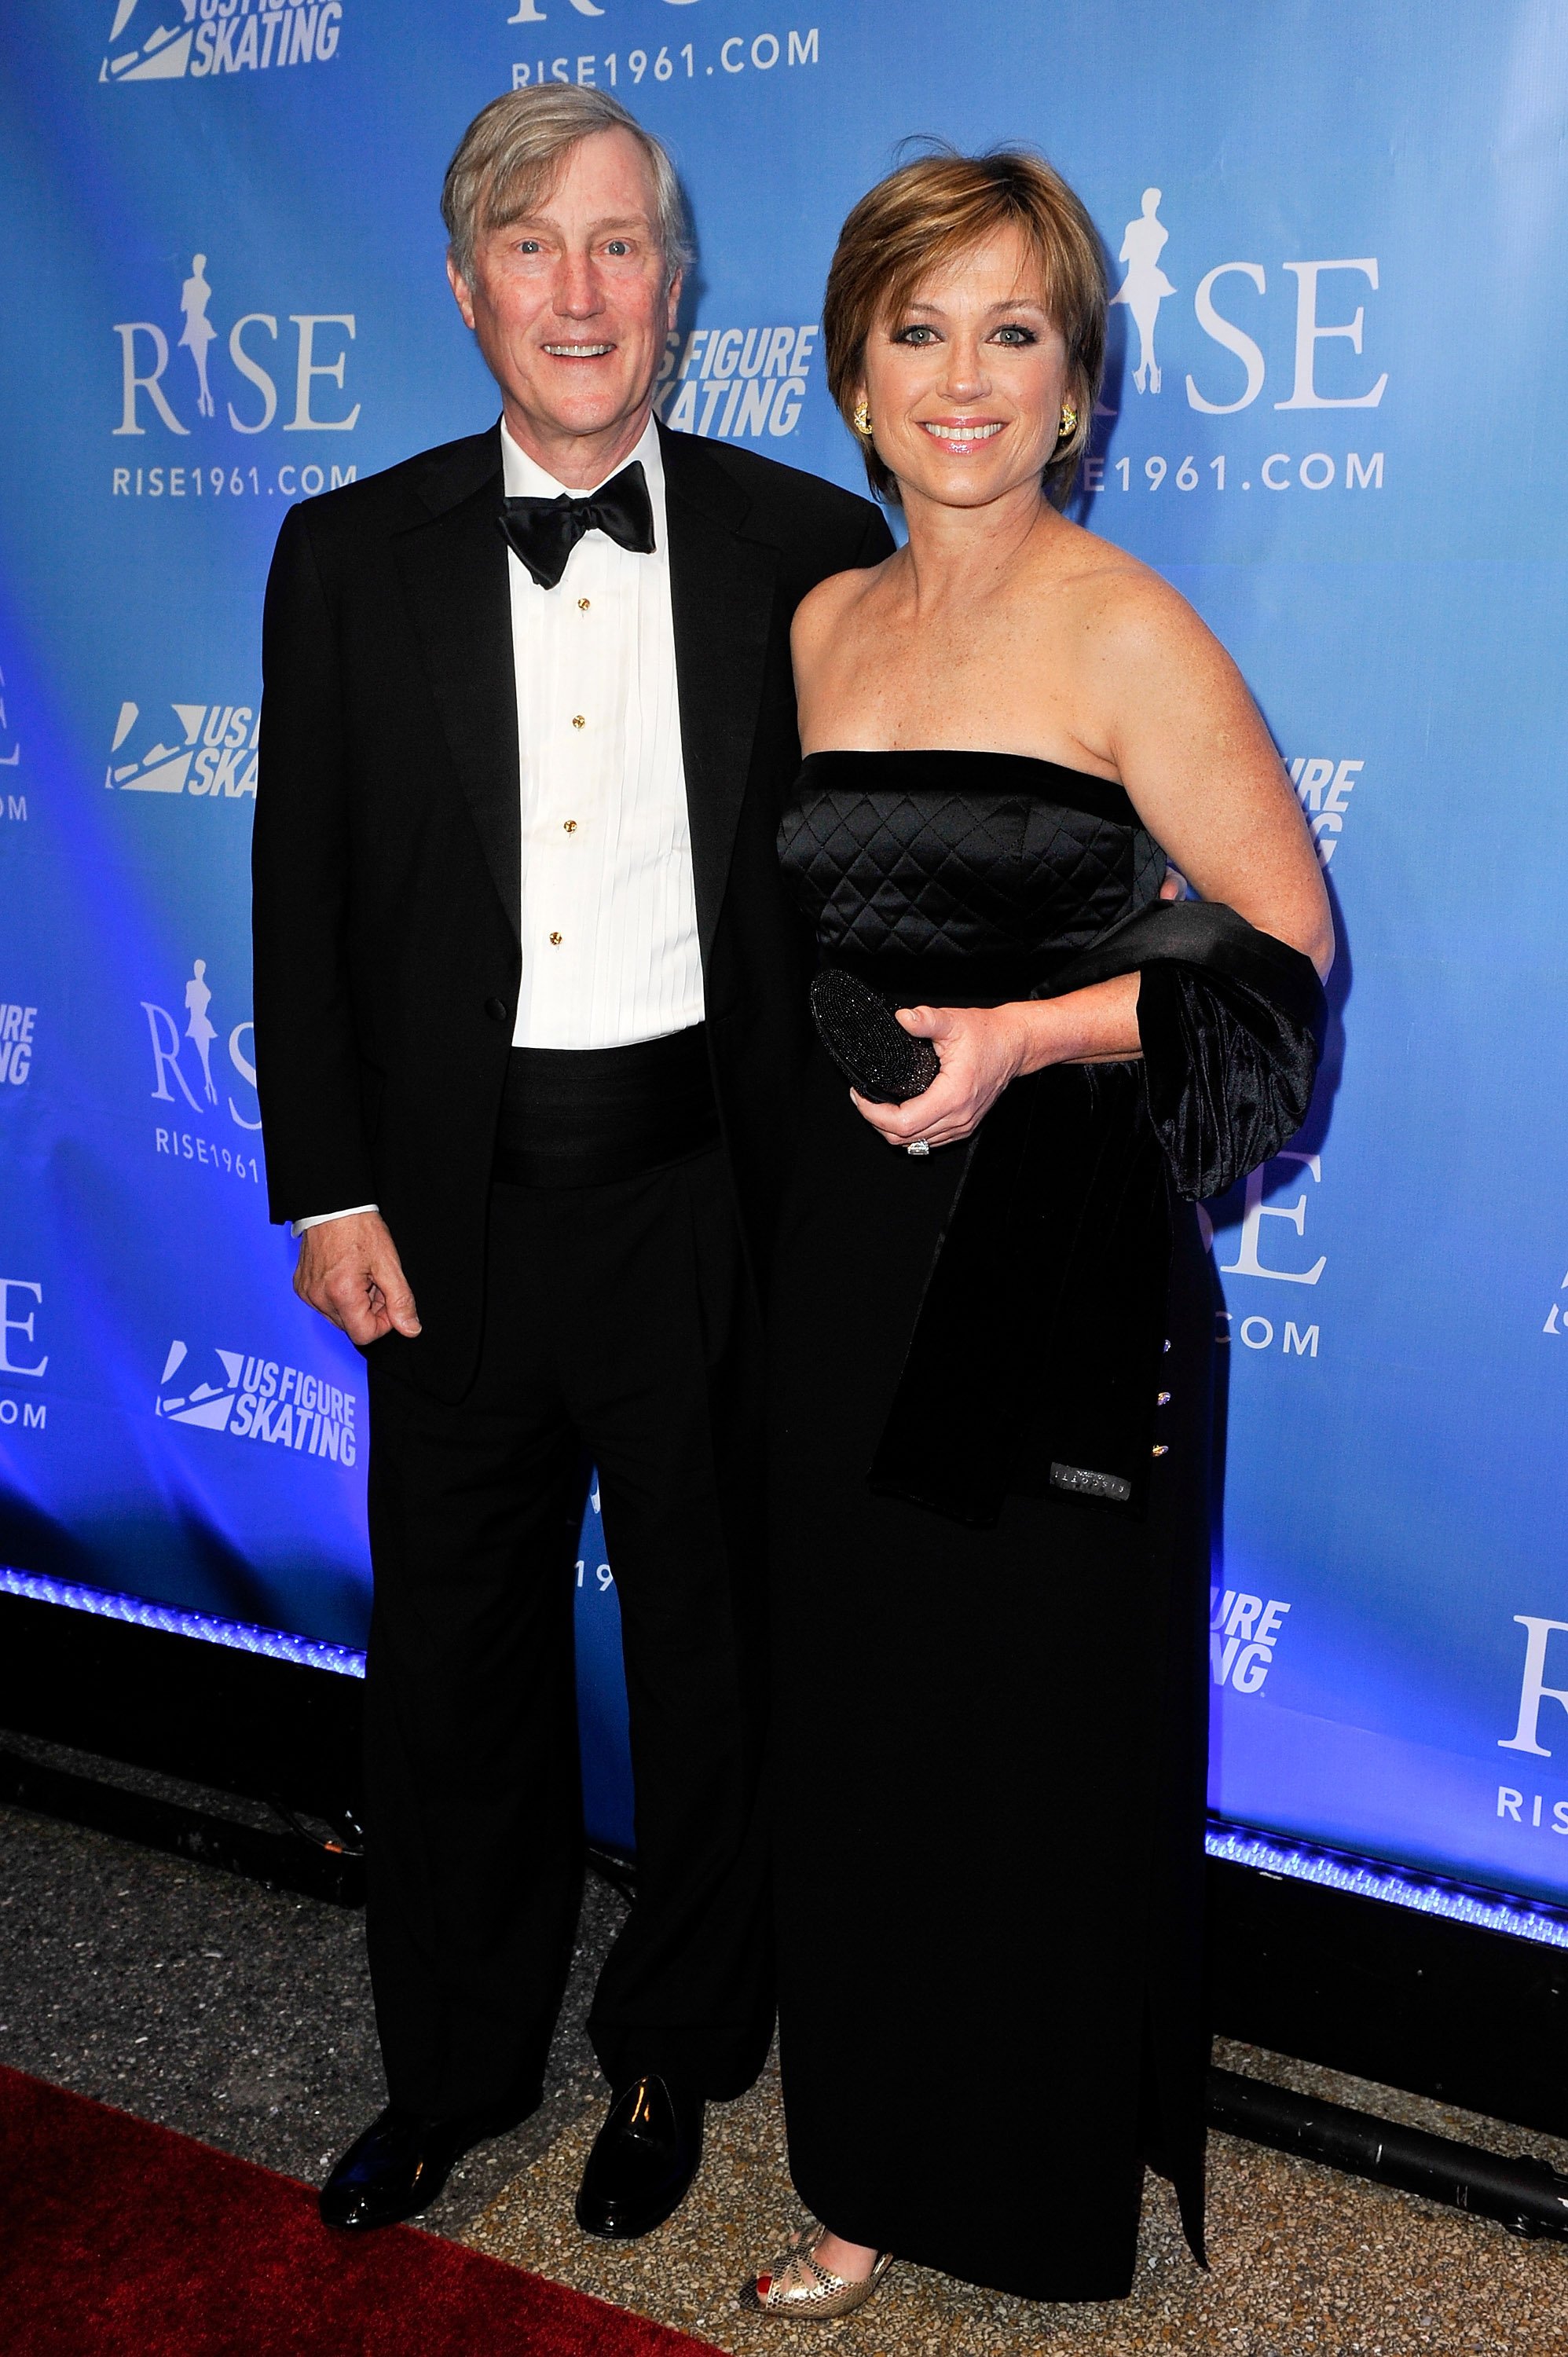  Dorothy Hamill and husband John McColl at the New York premiere of "RISE" in New York in 2011 | Source: Getty Images